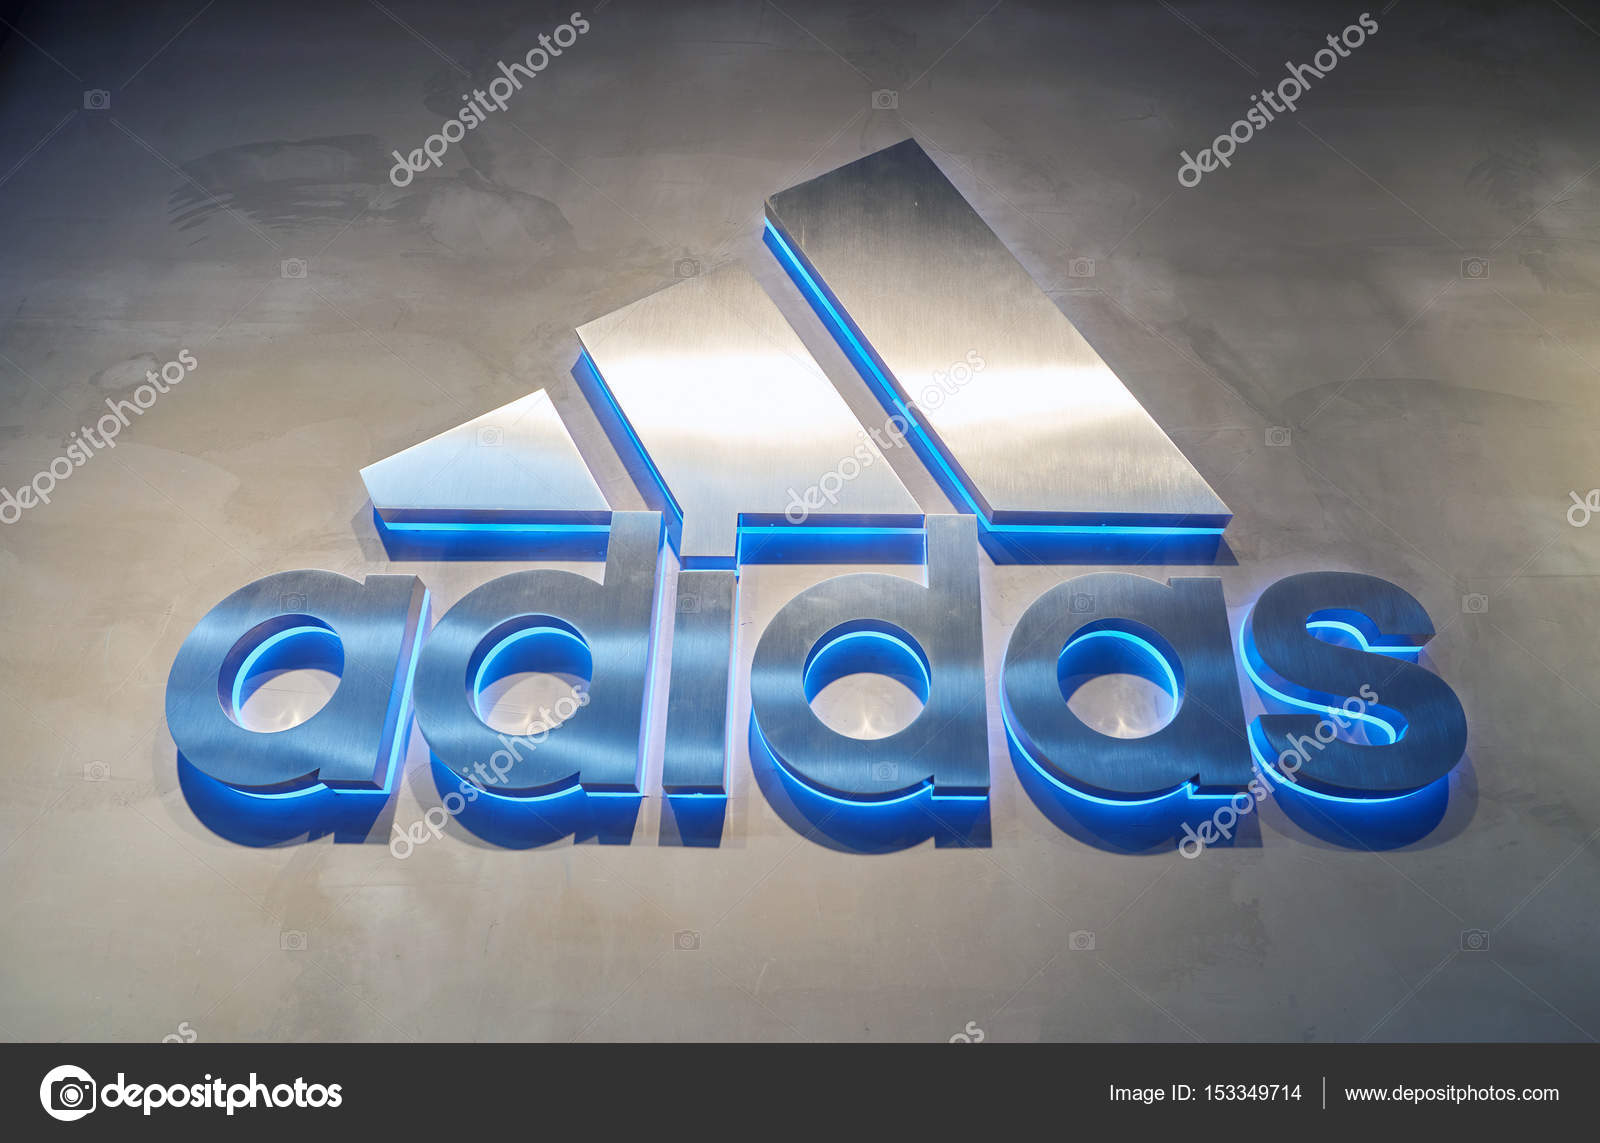 adidas sign in